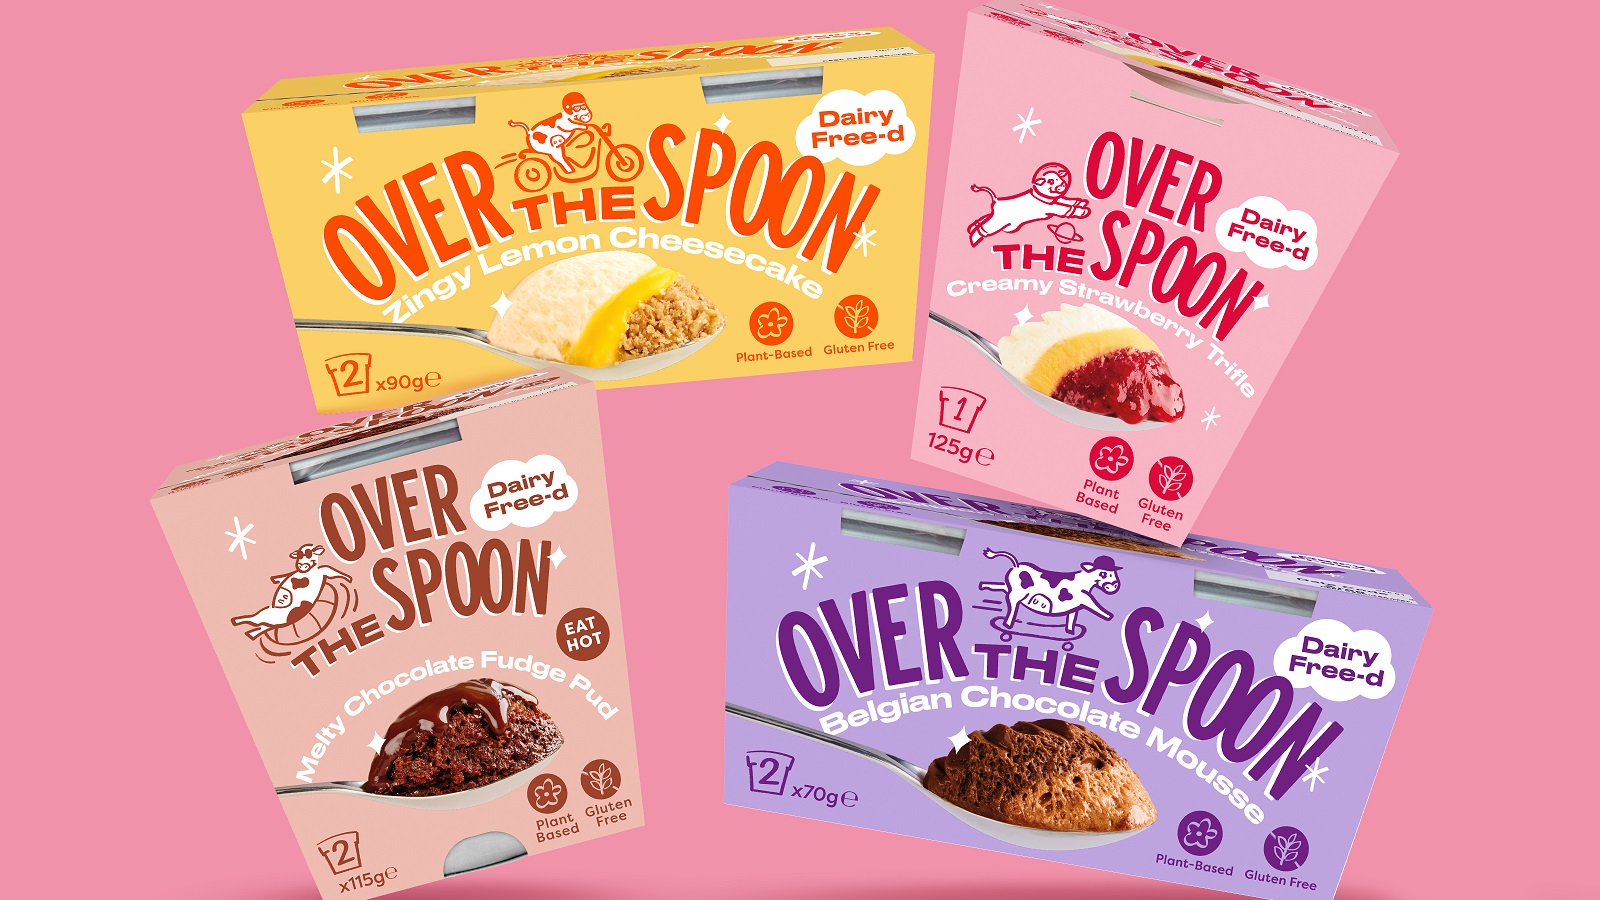 Delicious Dairy Free-D Desserts Land into the Mainstream Aisle